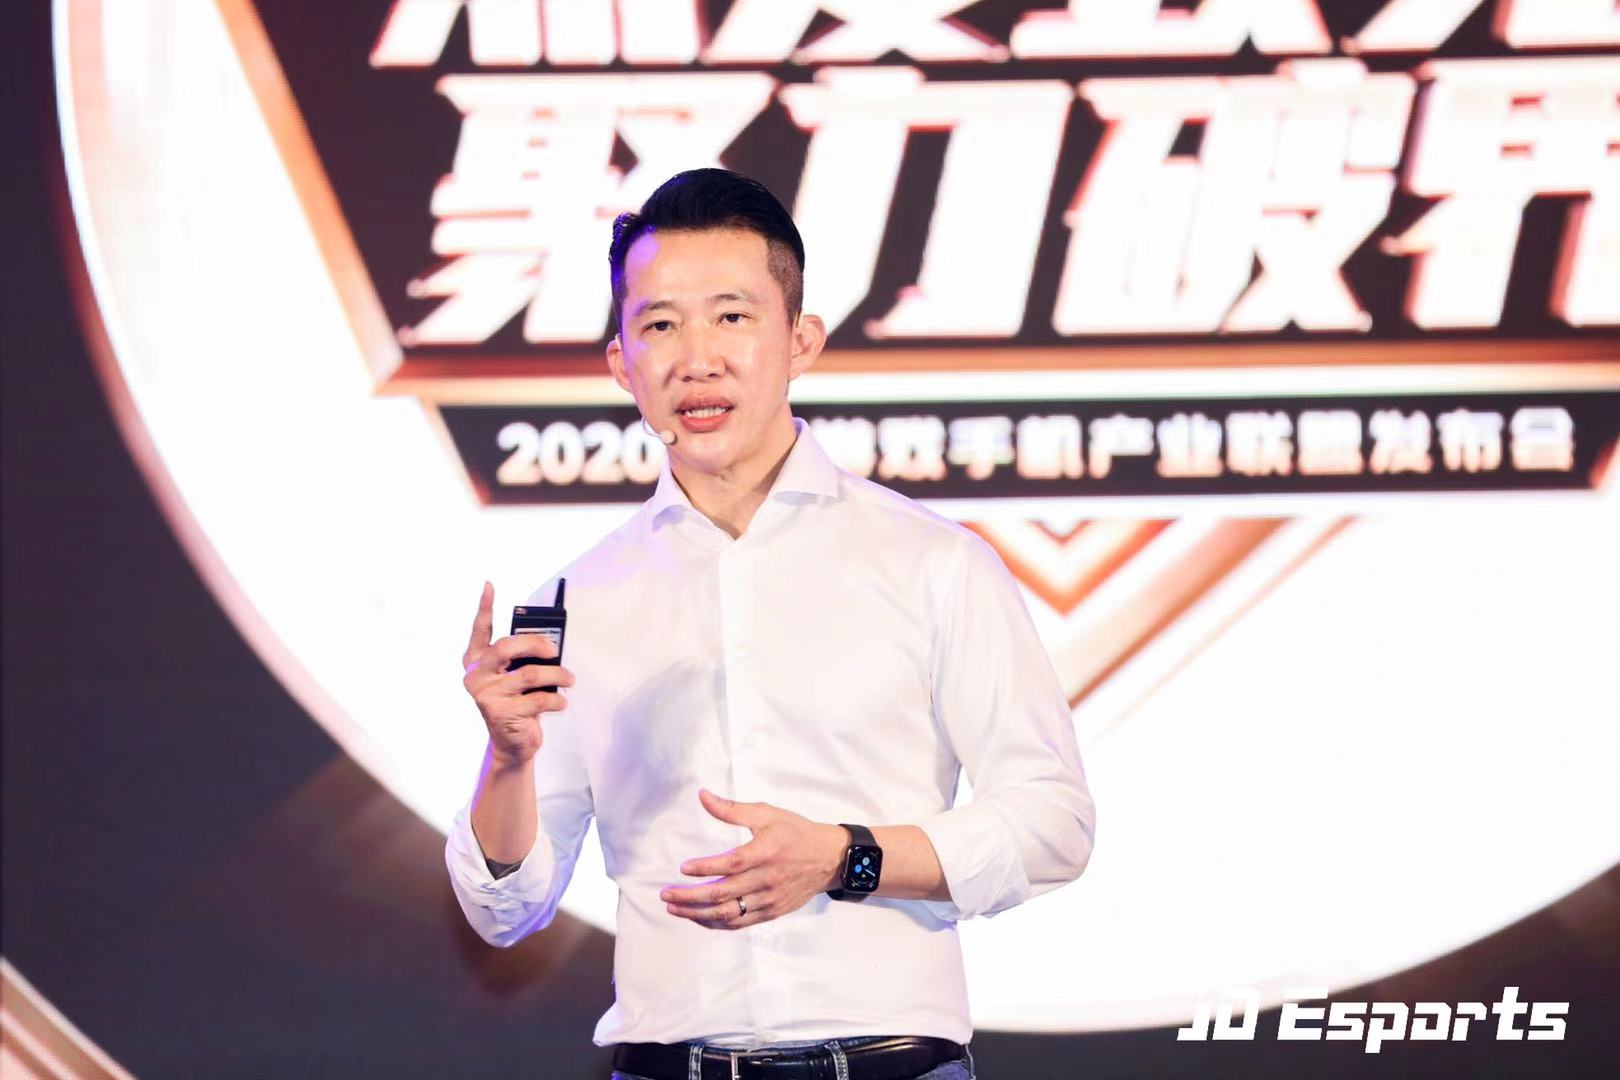 According to Daniel Tan, president of JD Mobile Devices